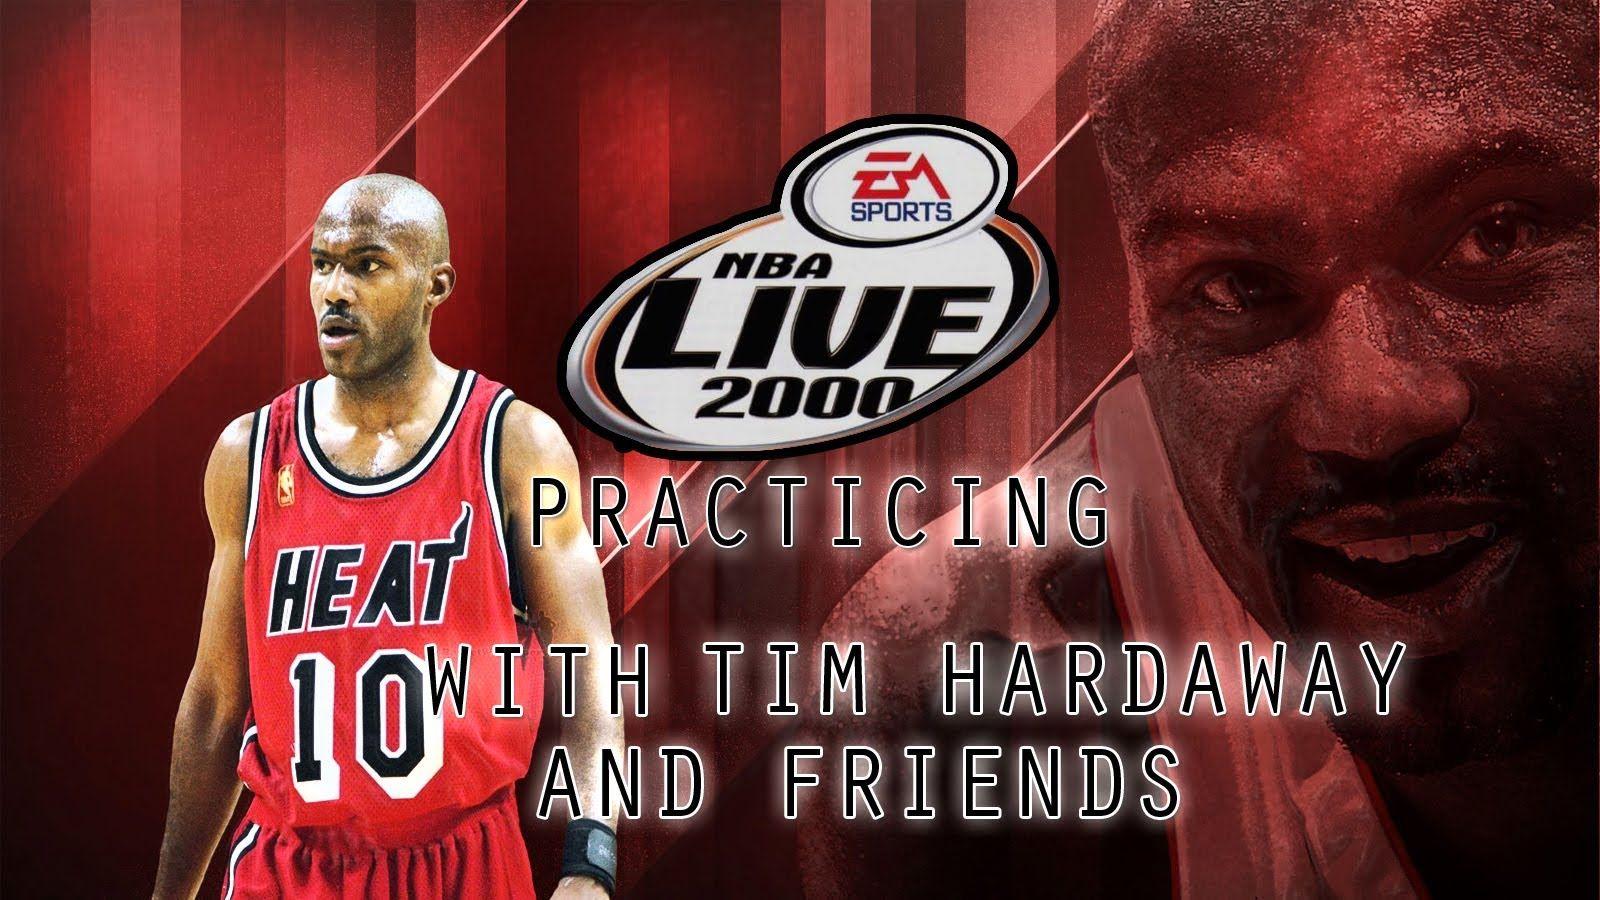 NBA Live 2000 (PS1) with Tim Hardaway & Friends